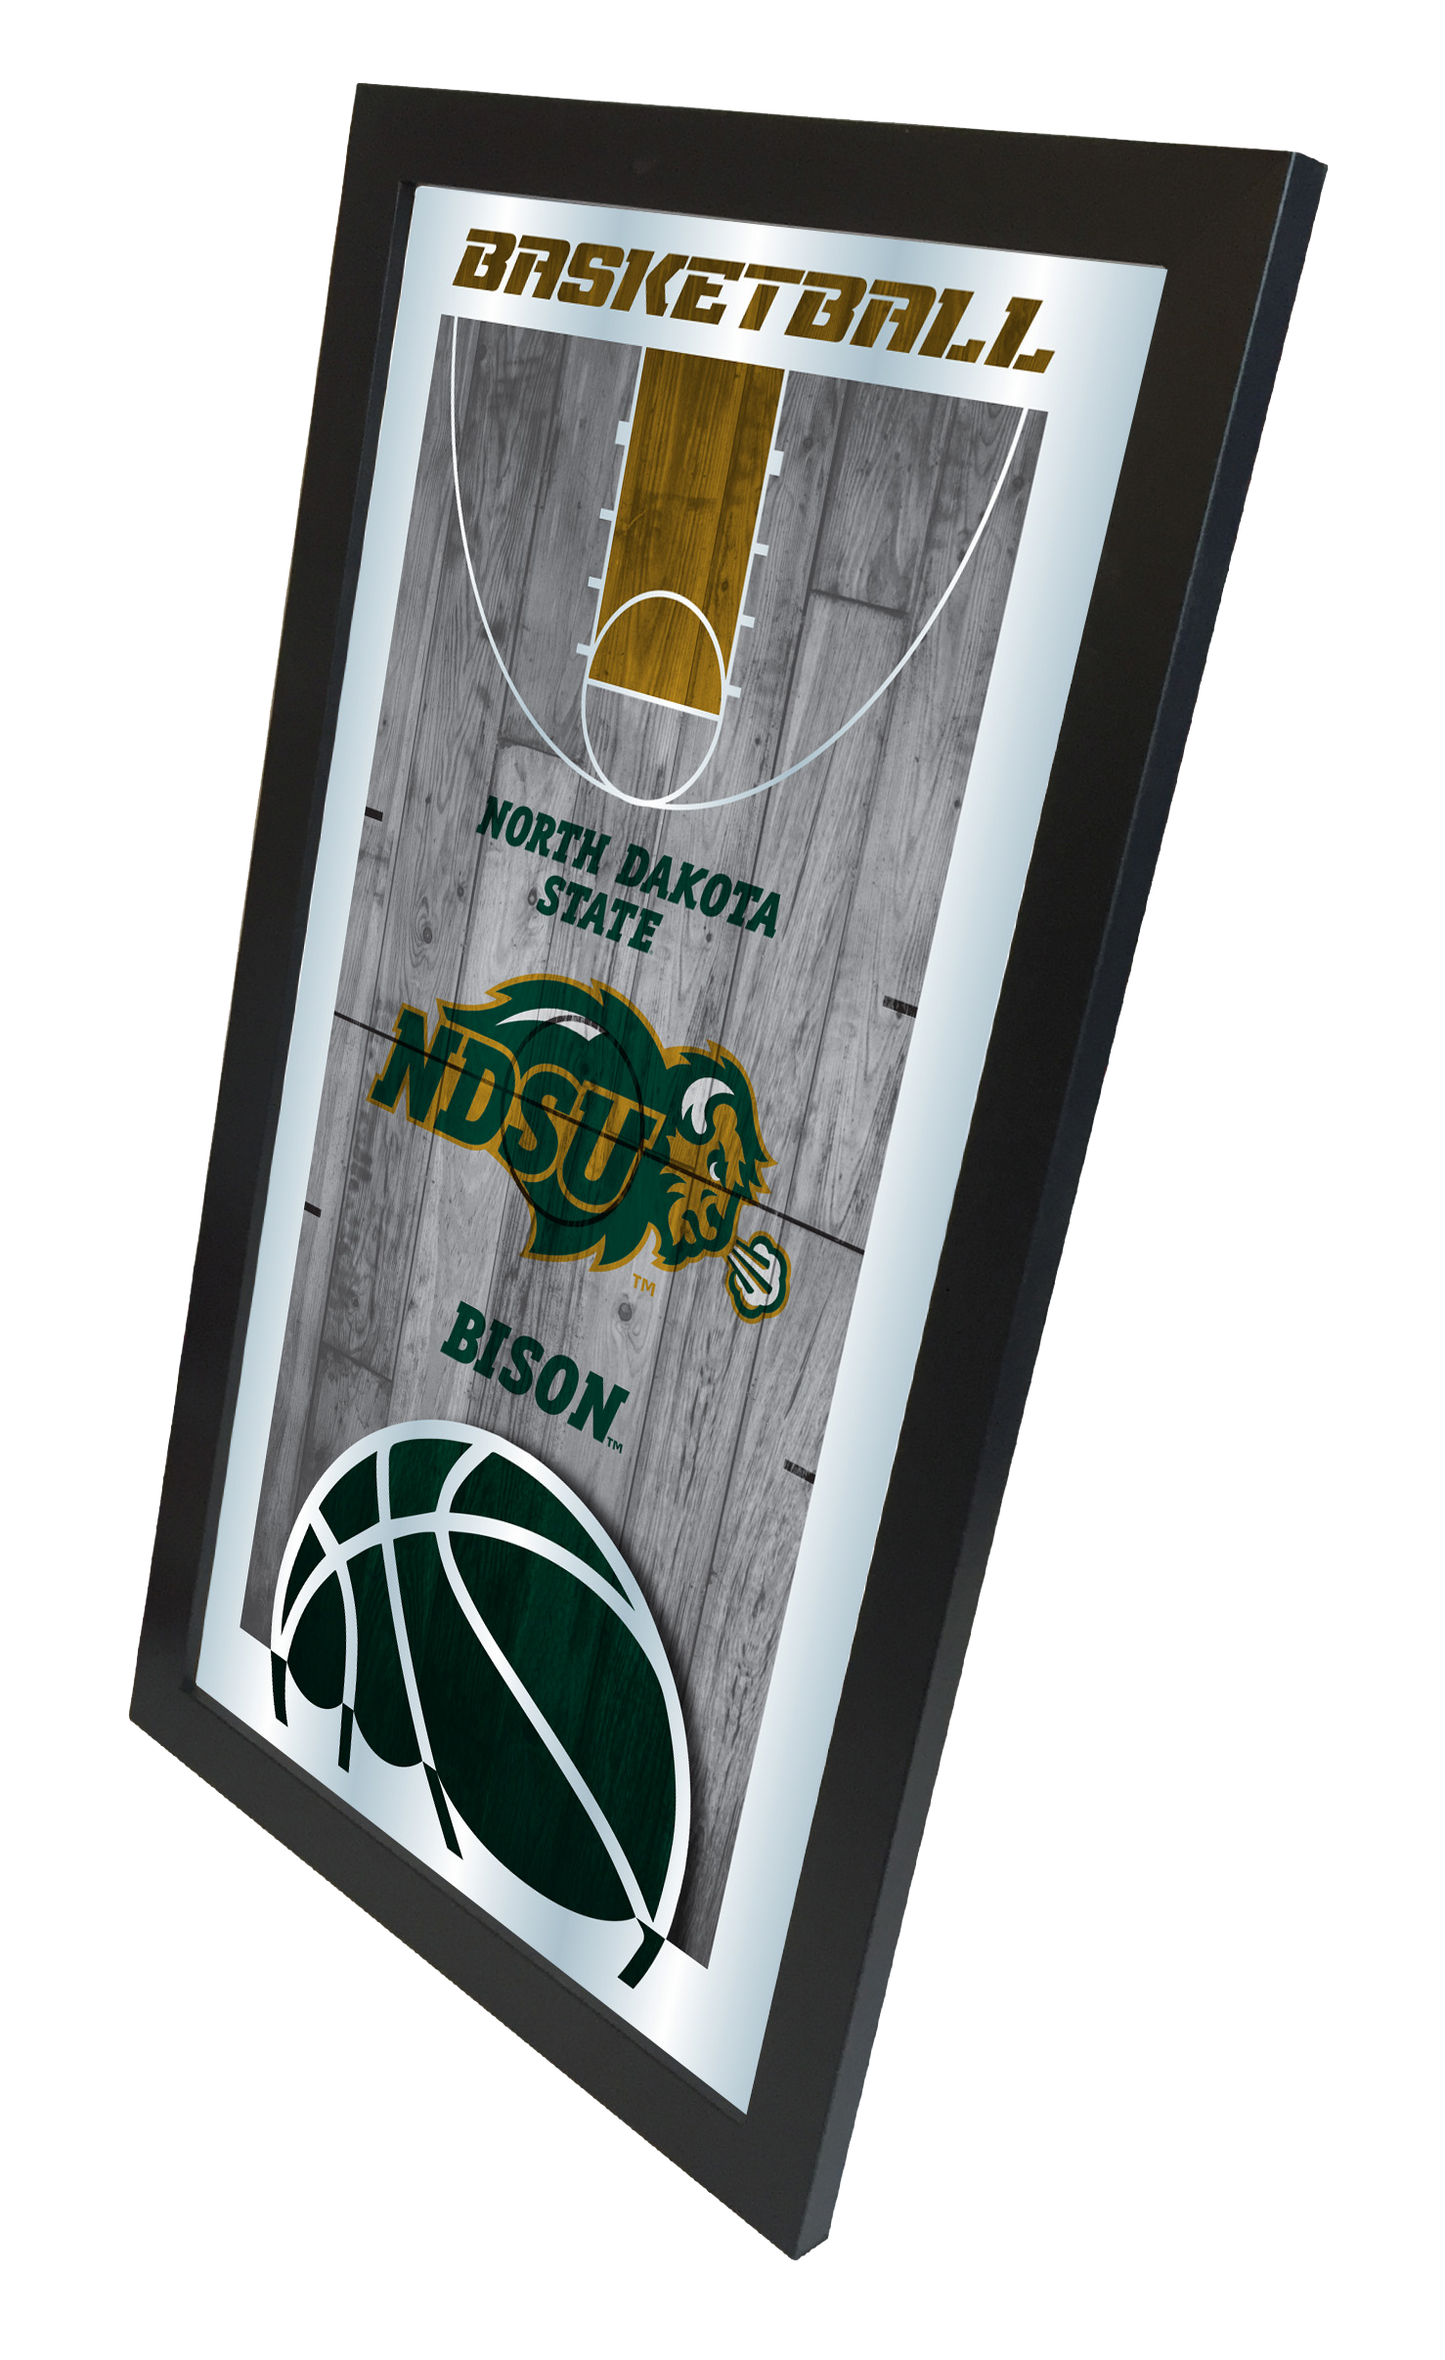 North Dakota State University Bison logo on a basketball court design mirror, captured at an angled perspective.